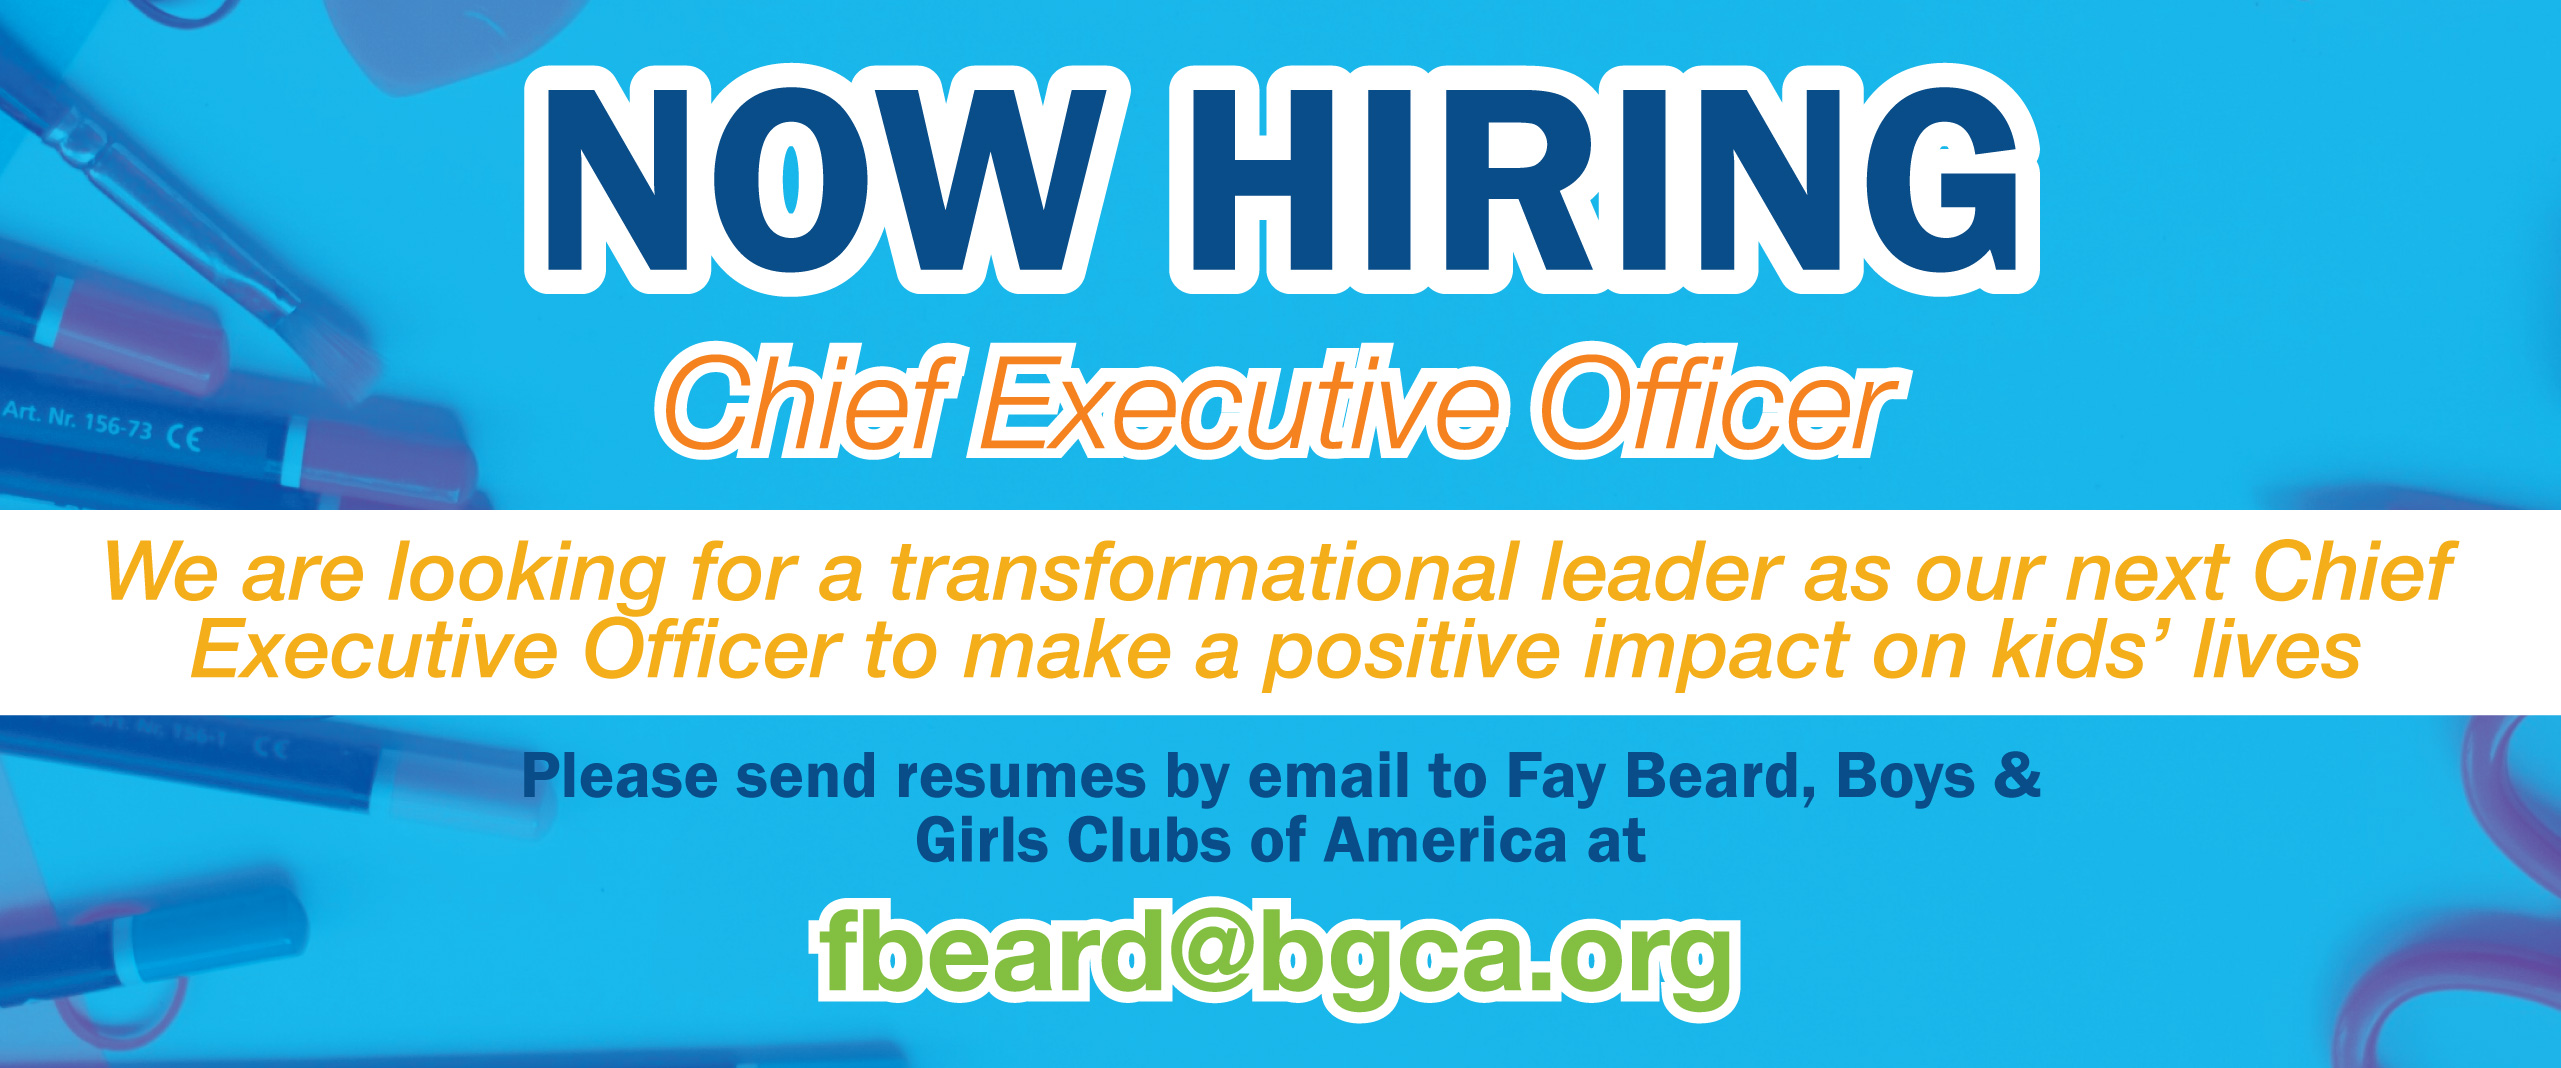 Now Hiring Chief Executive Officer